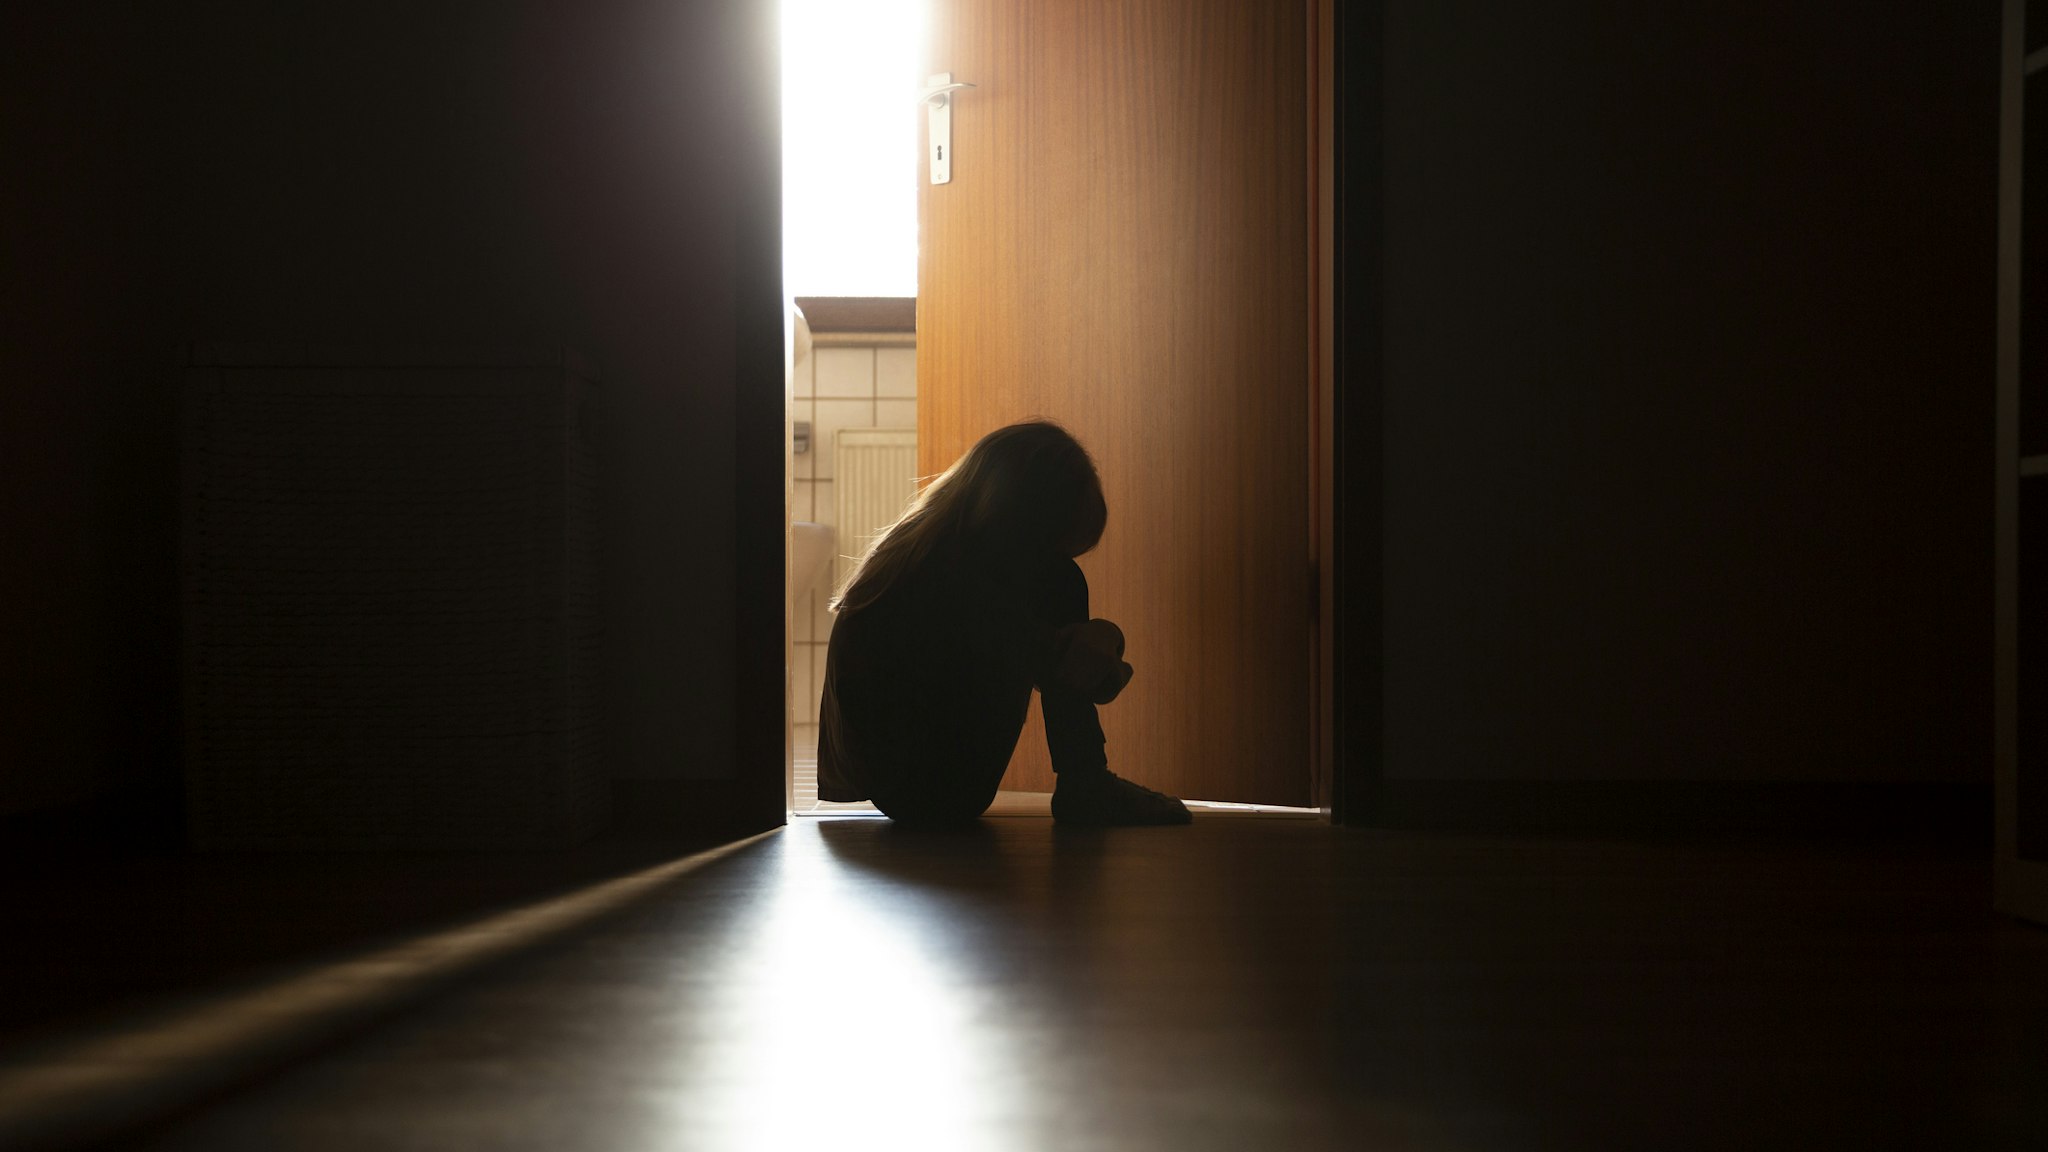 Despairing child sitting with head on knees in the dark frame of a doorway, backlit by a room behind flooded with daylight - stock photo